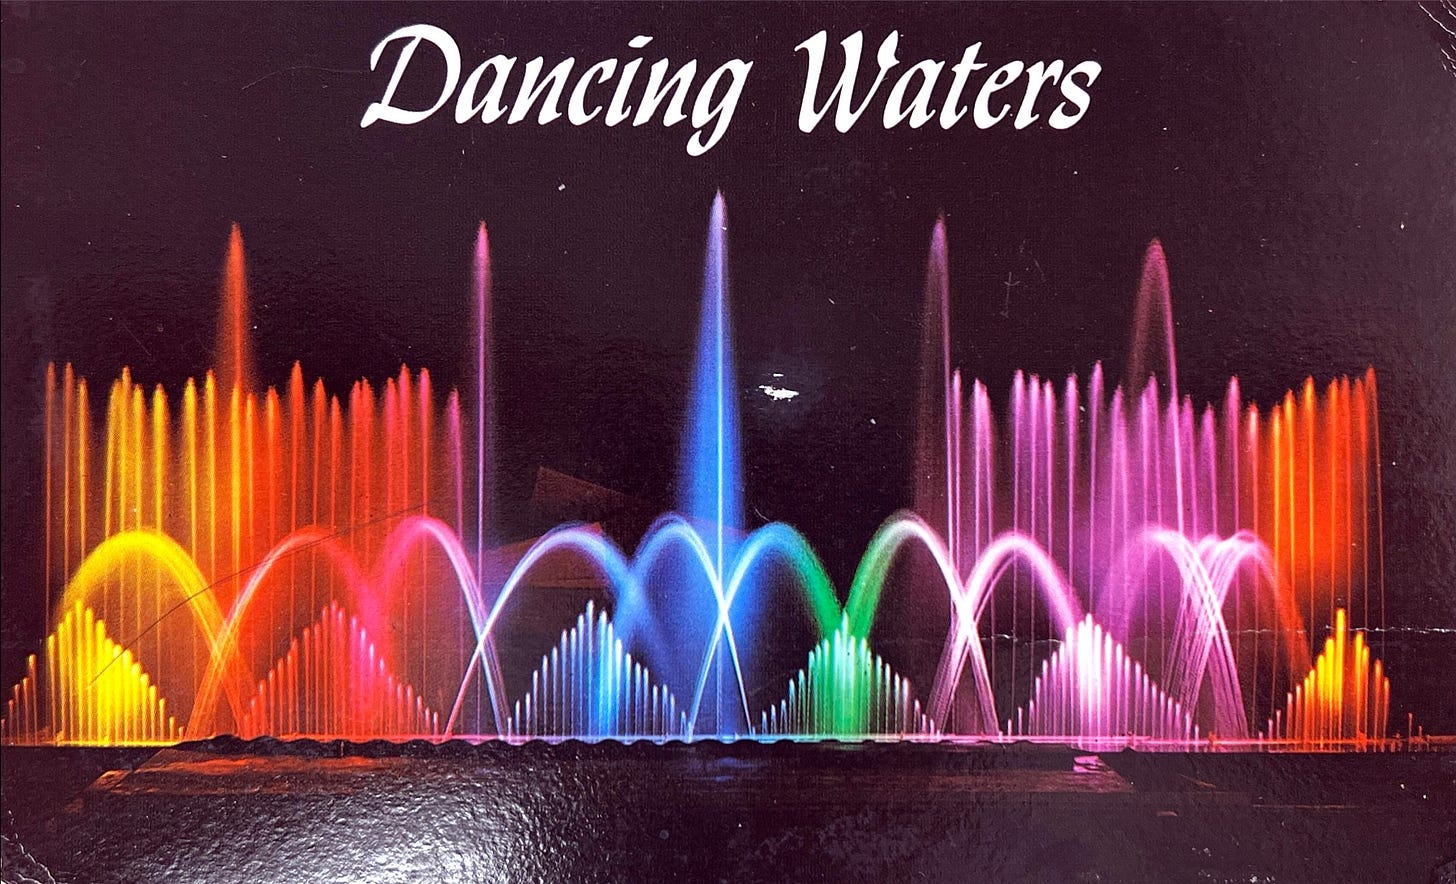 Photo of water fountain lit up in rainbow colors with the title "Dancing Waters."